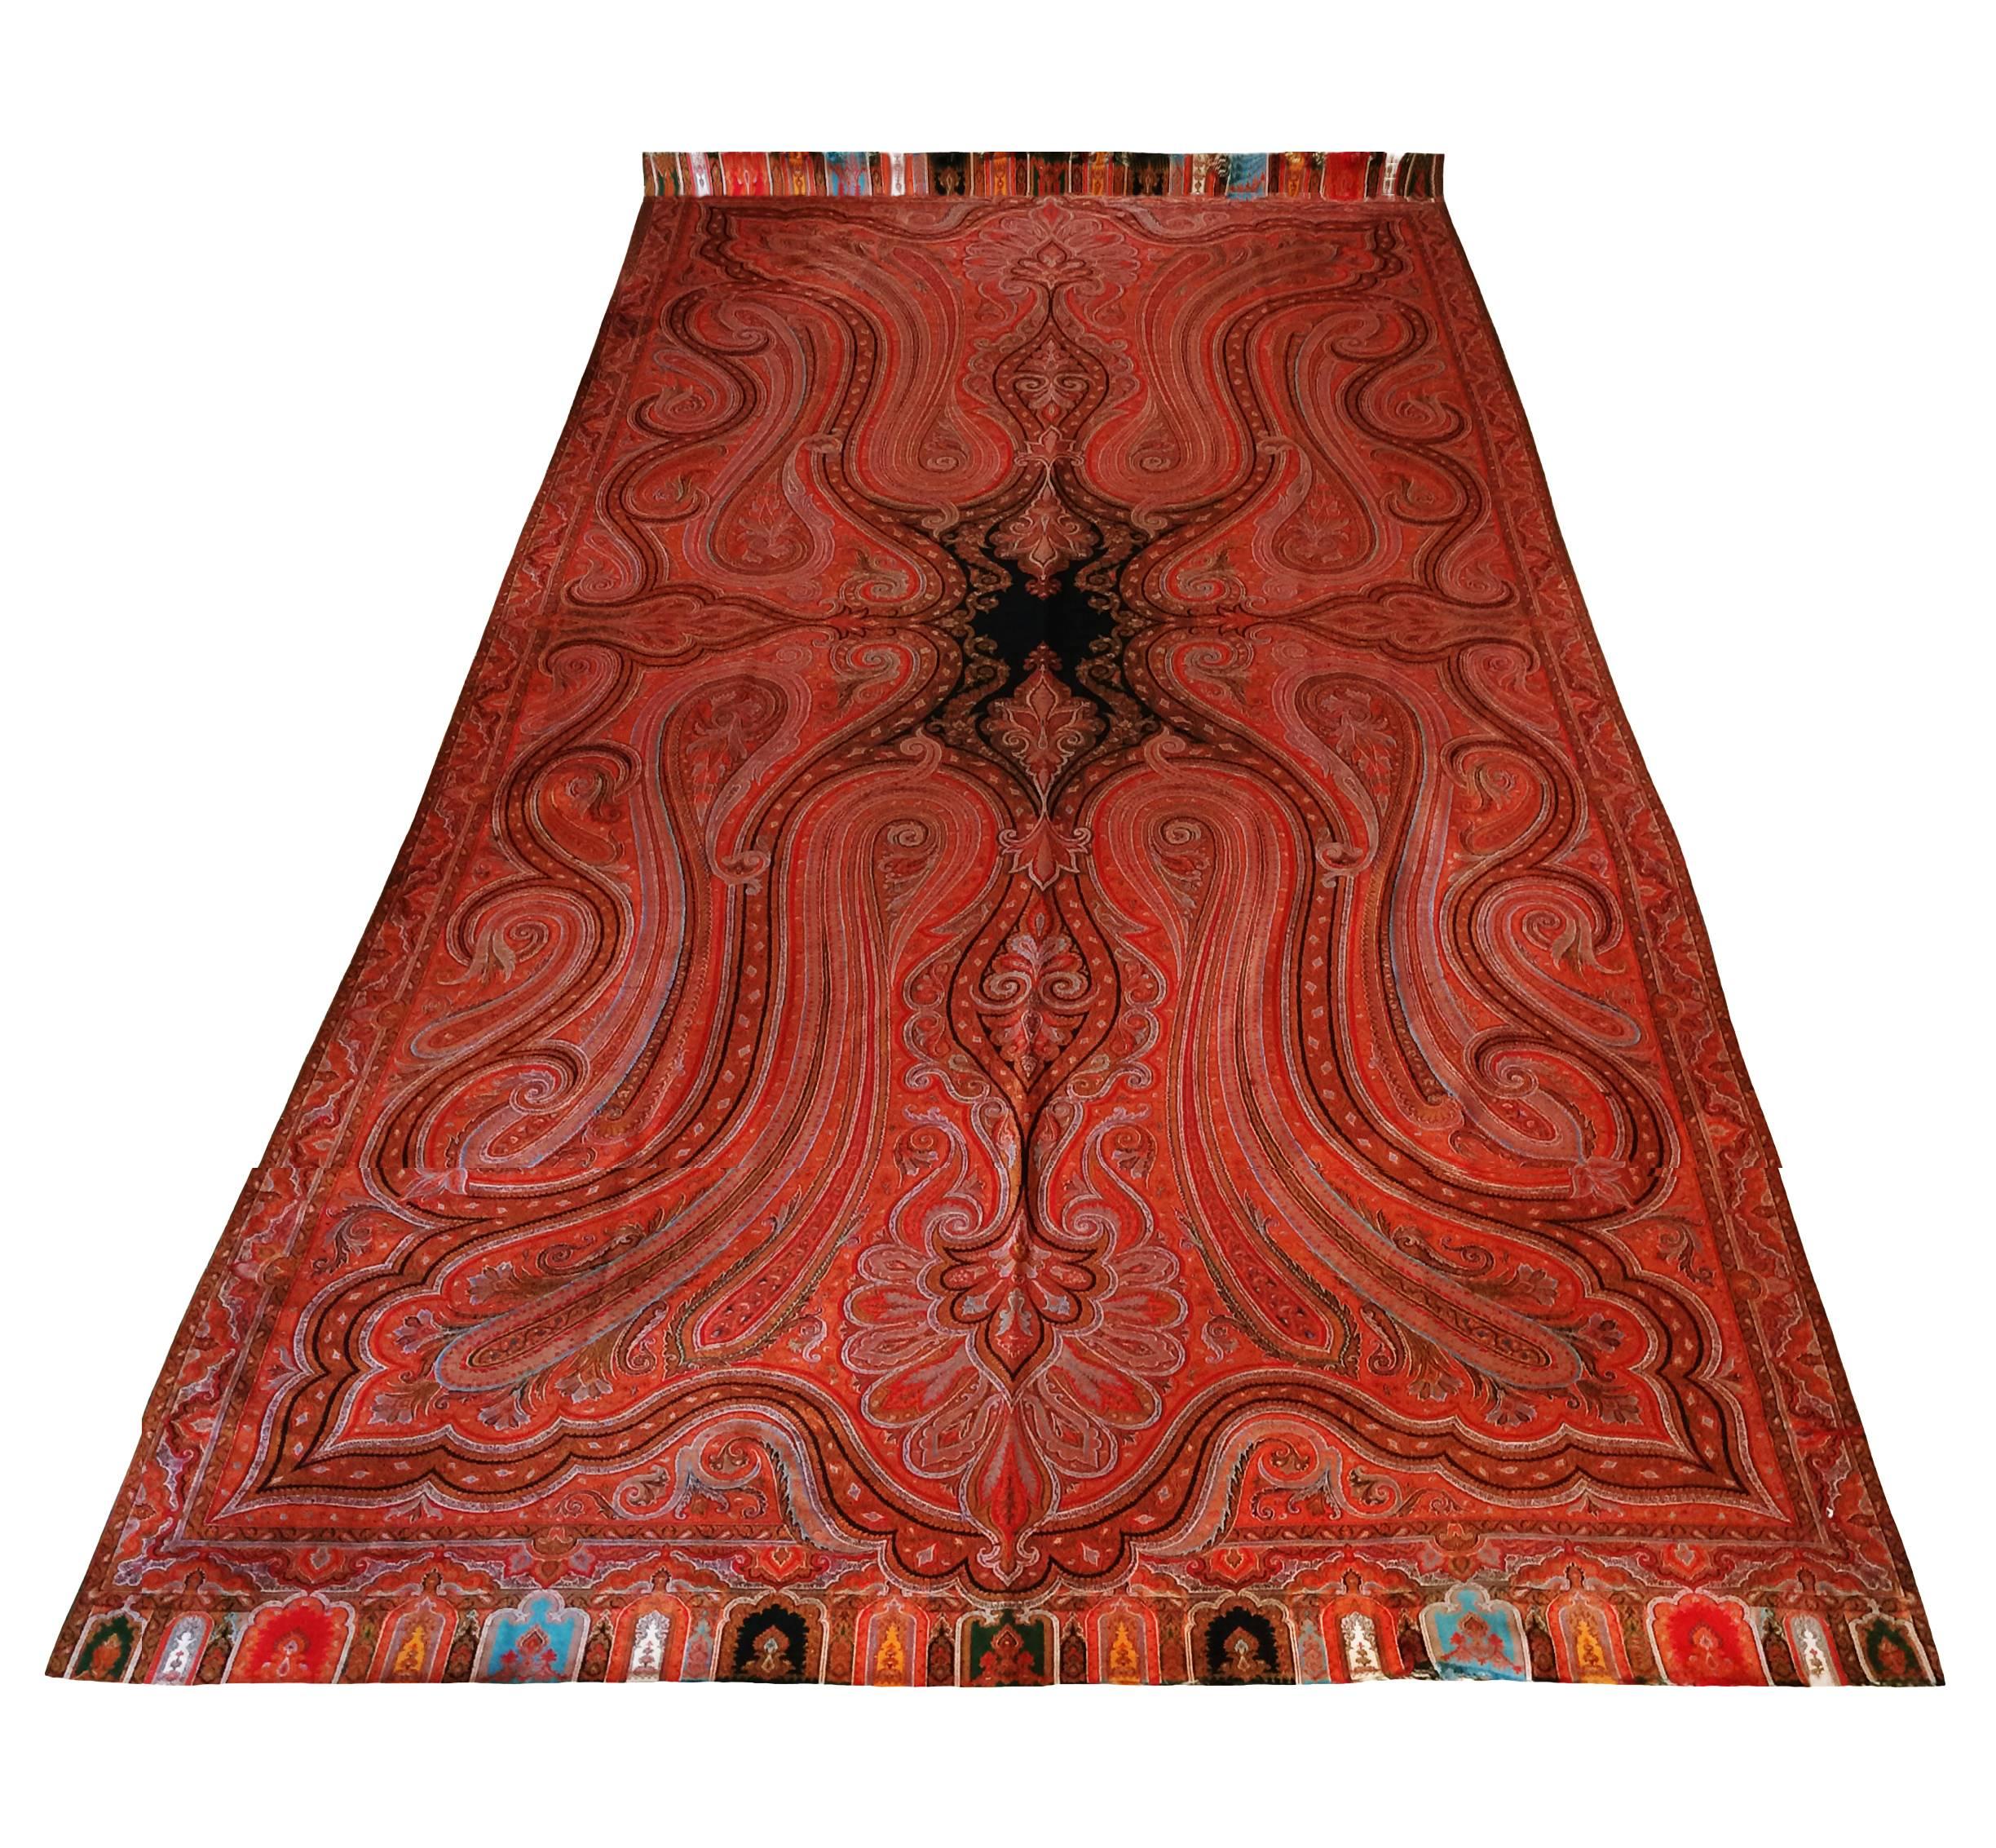 English Kashmir embroidered paisley textile; multicolored fringe. The hand needlework technique is known as "Rafugars". Separately woven and joined to the field, center medallion in dark cashmere. Predominately in red, green, blue and